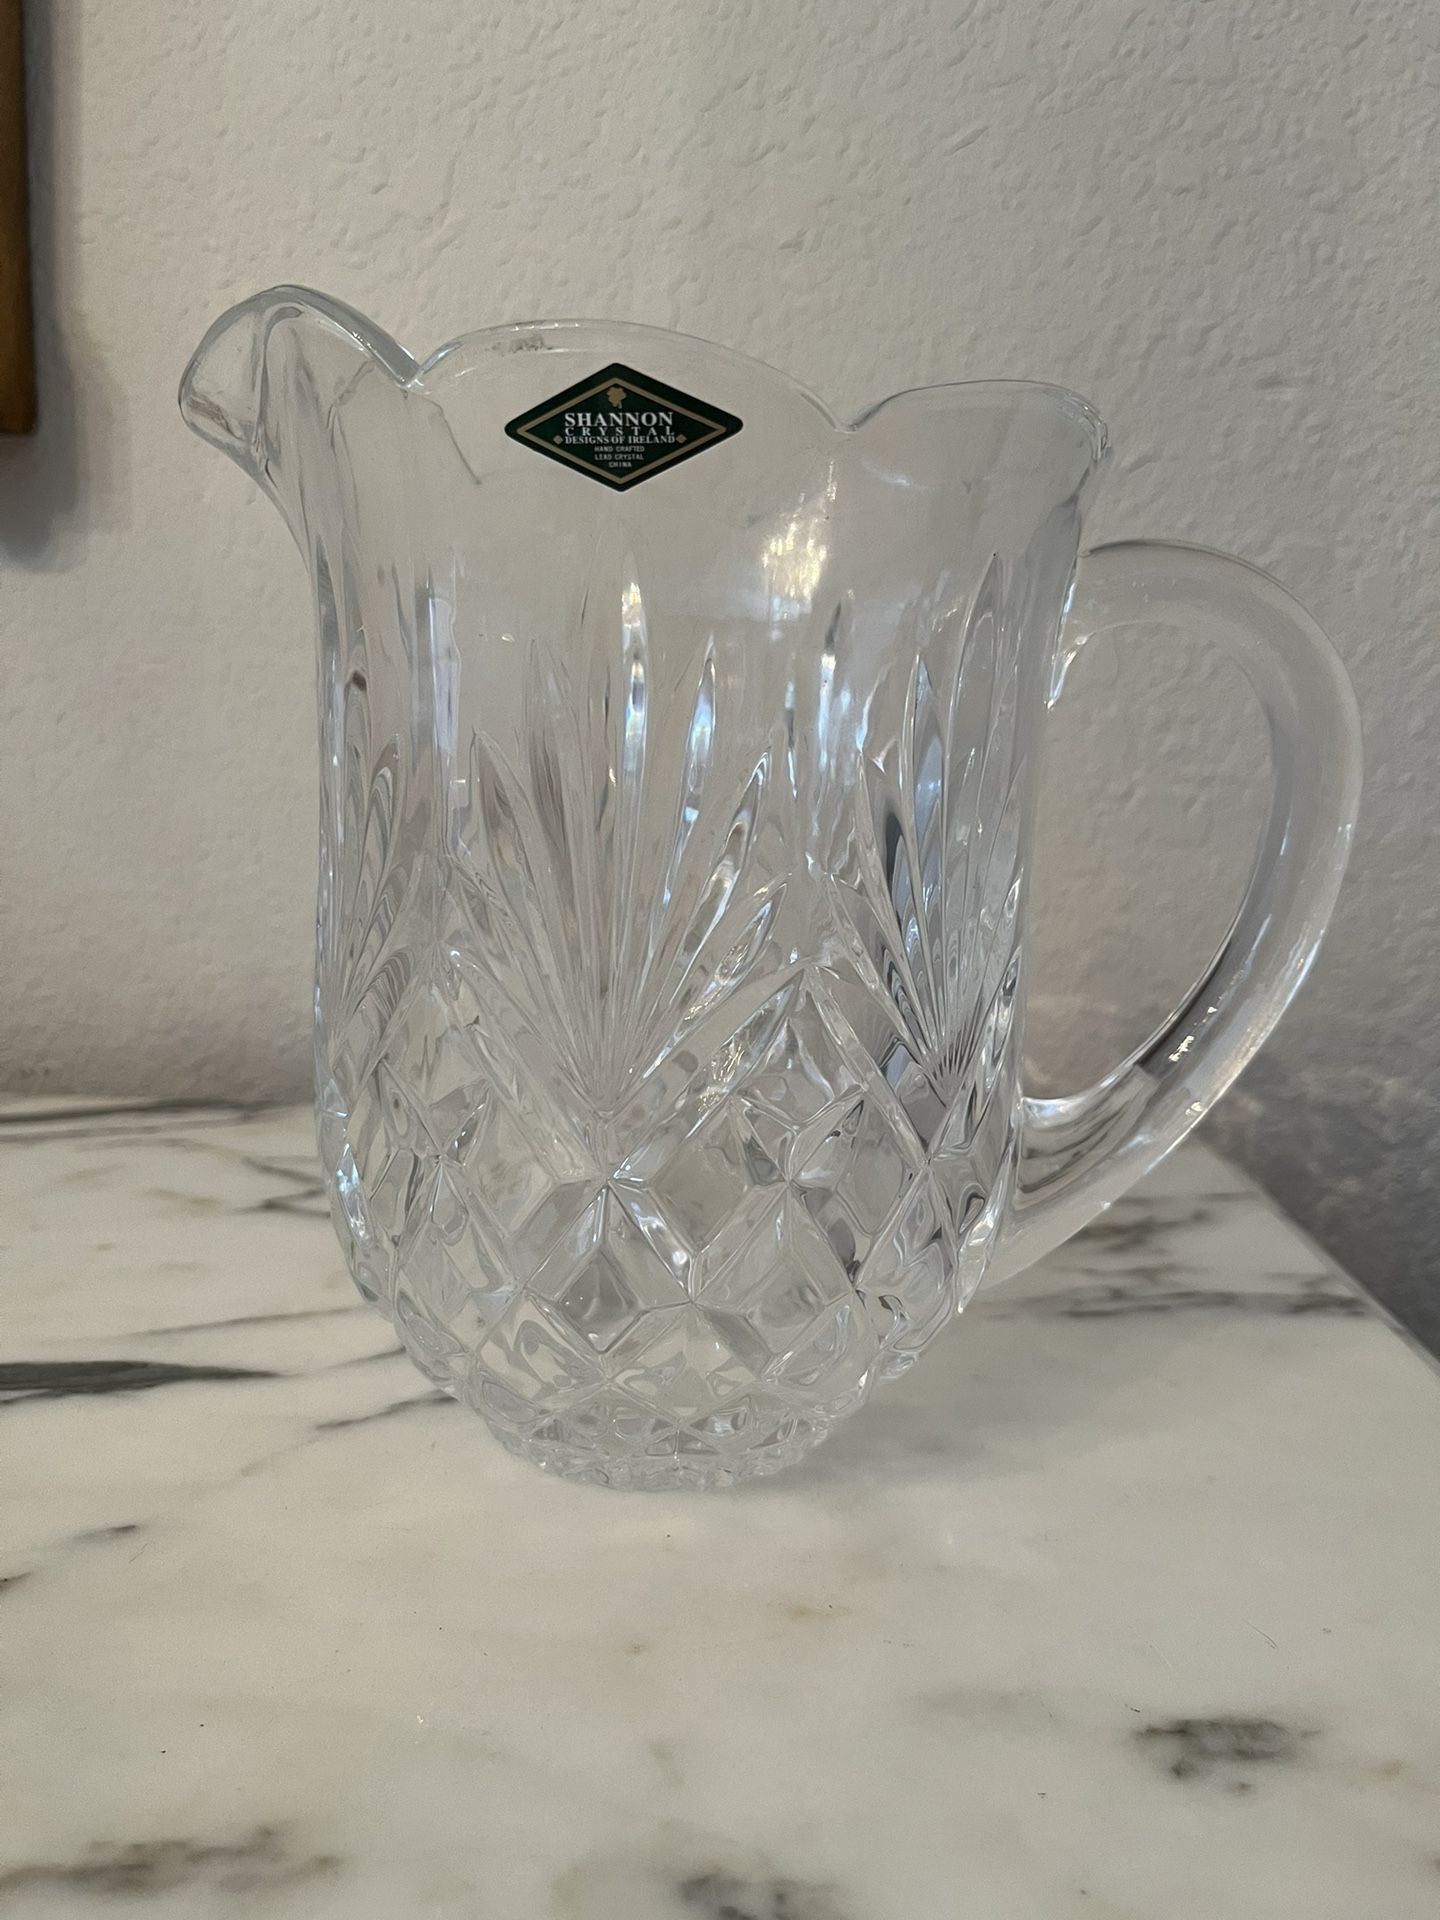 New Lead Crystal Pitcher